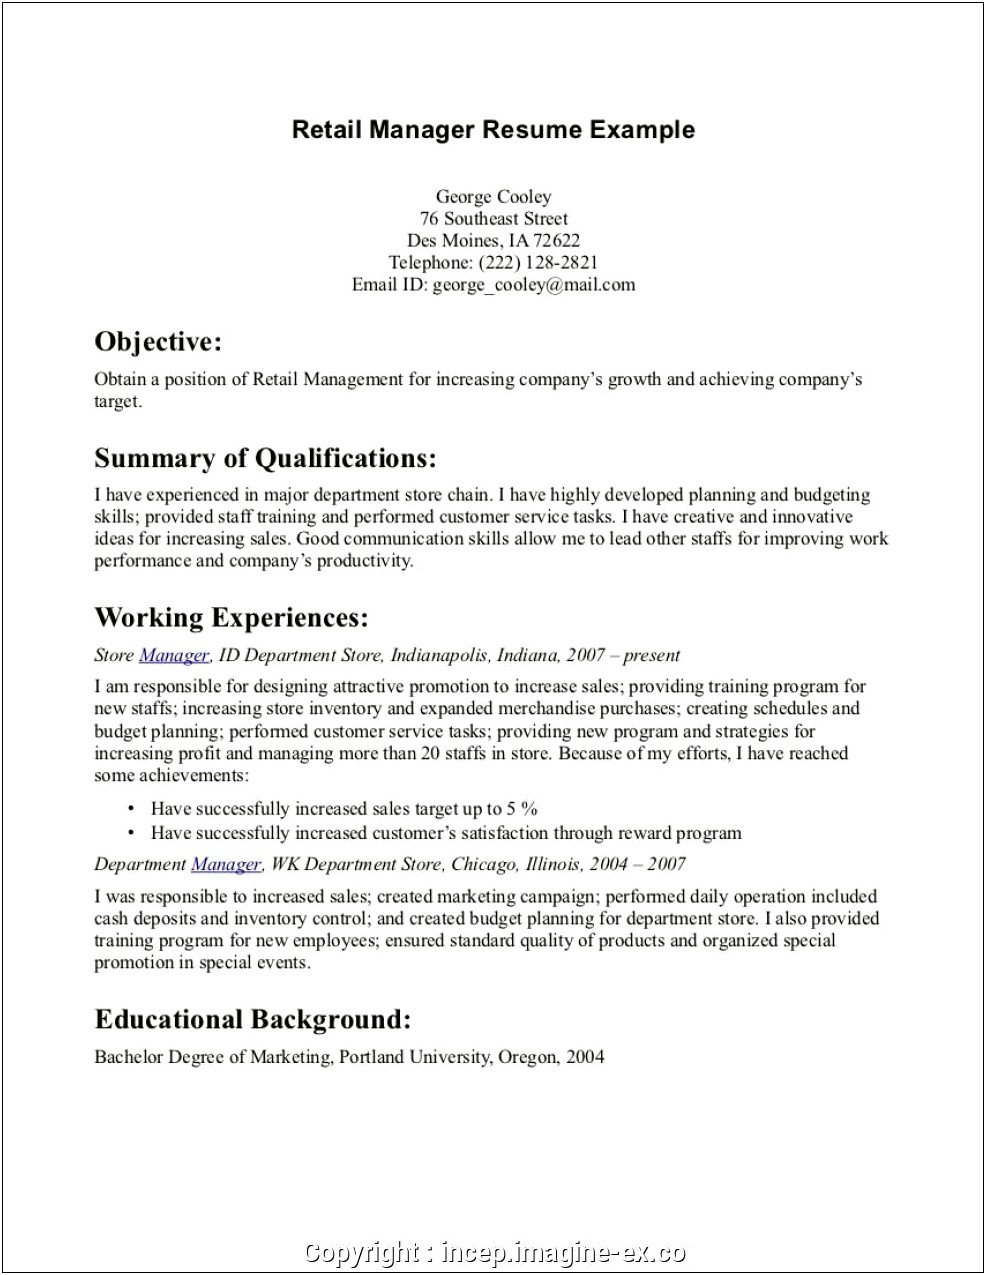 Skills For A Resume For Retail